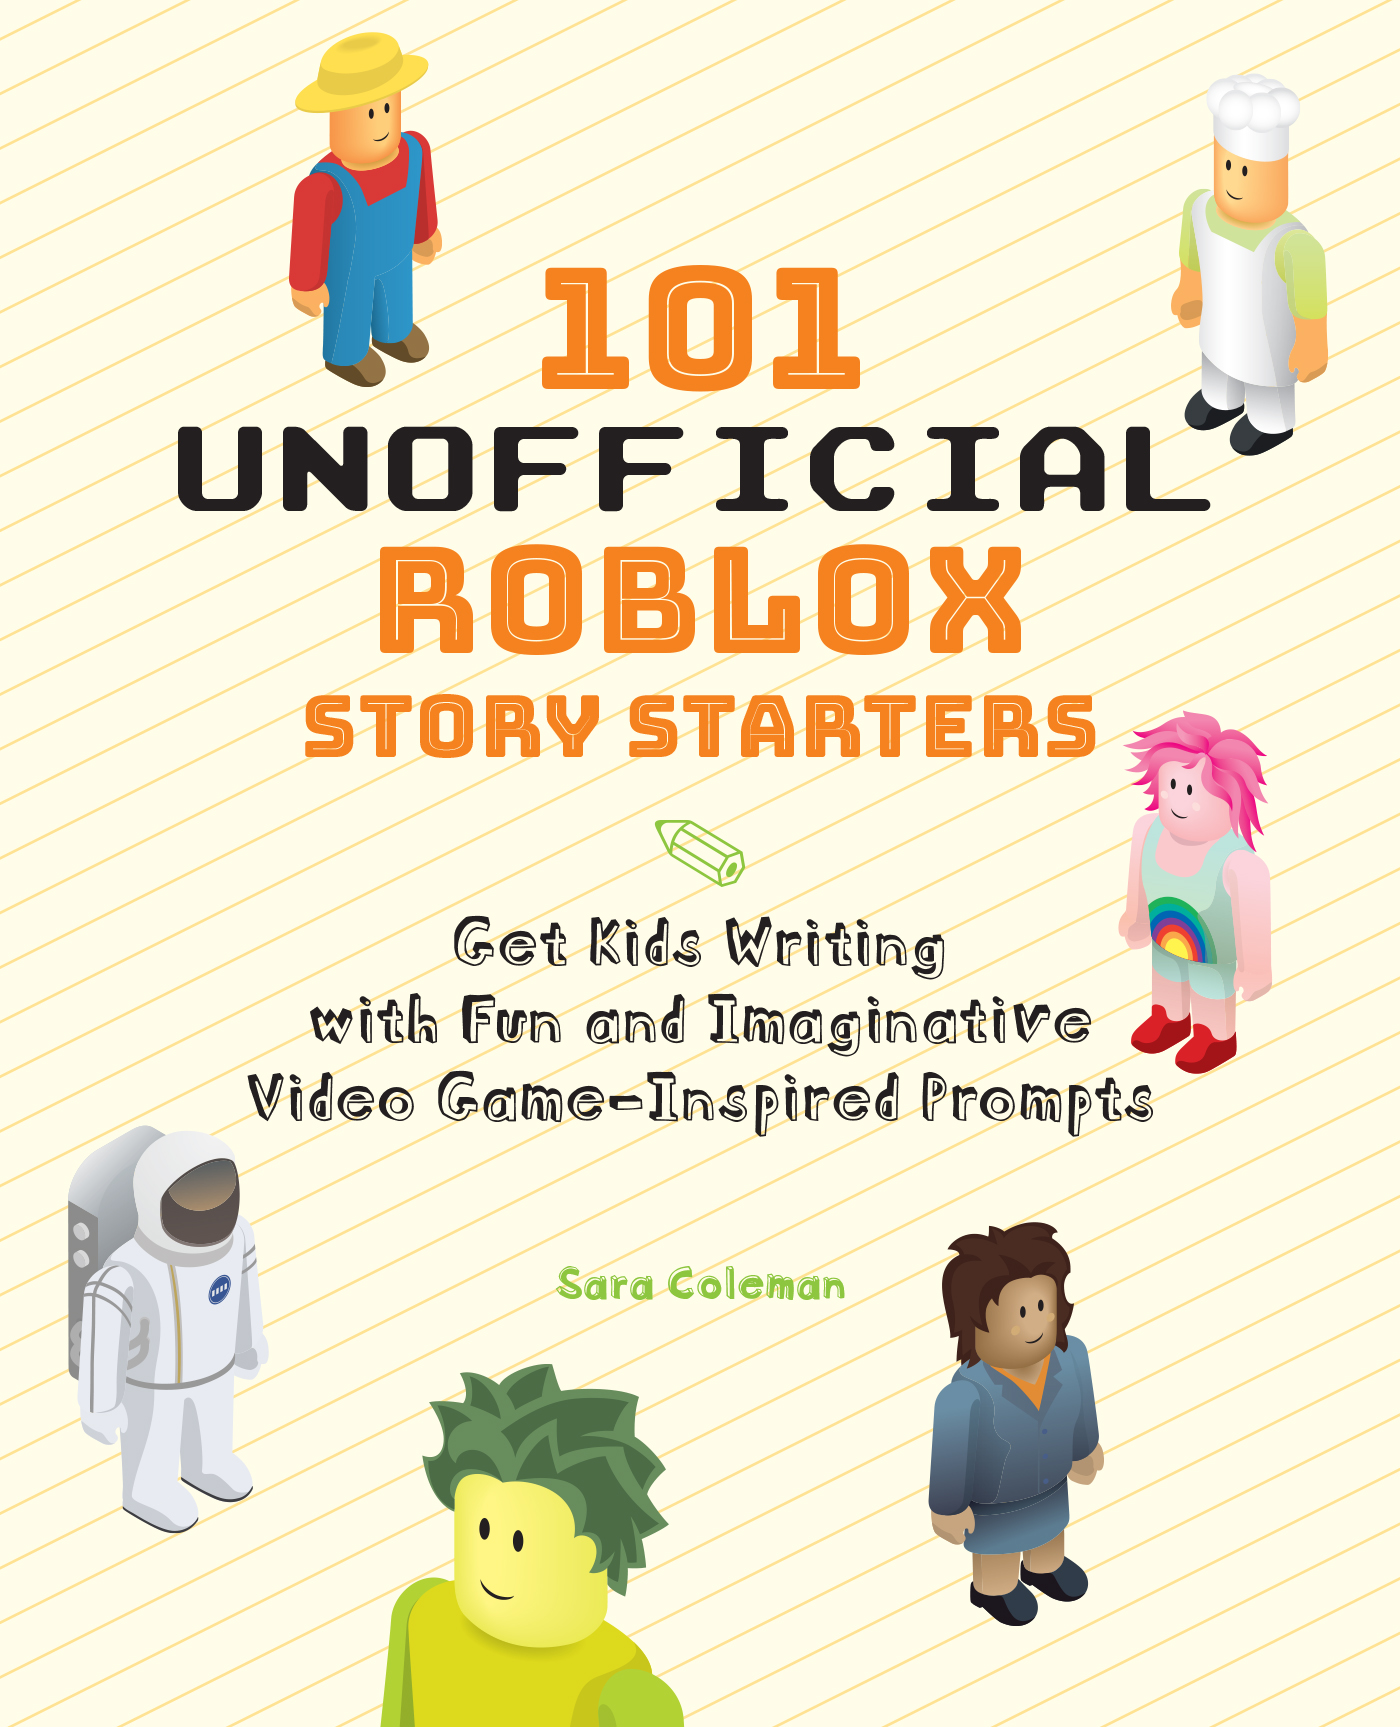 101 Unofficial Roblox Story Starters Ulysses Press - roblox story pictures